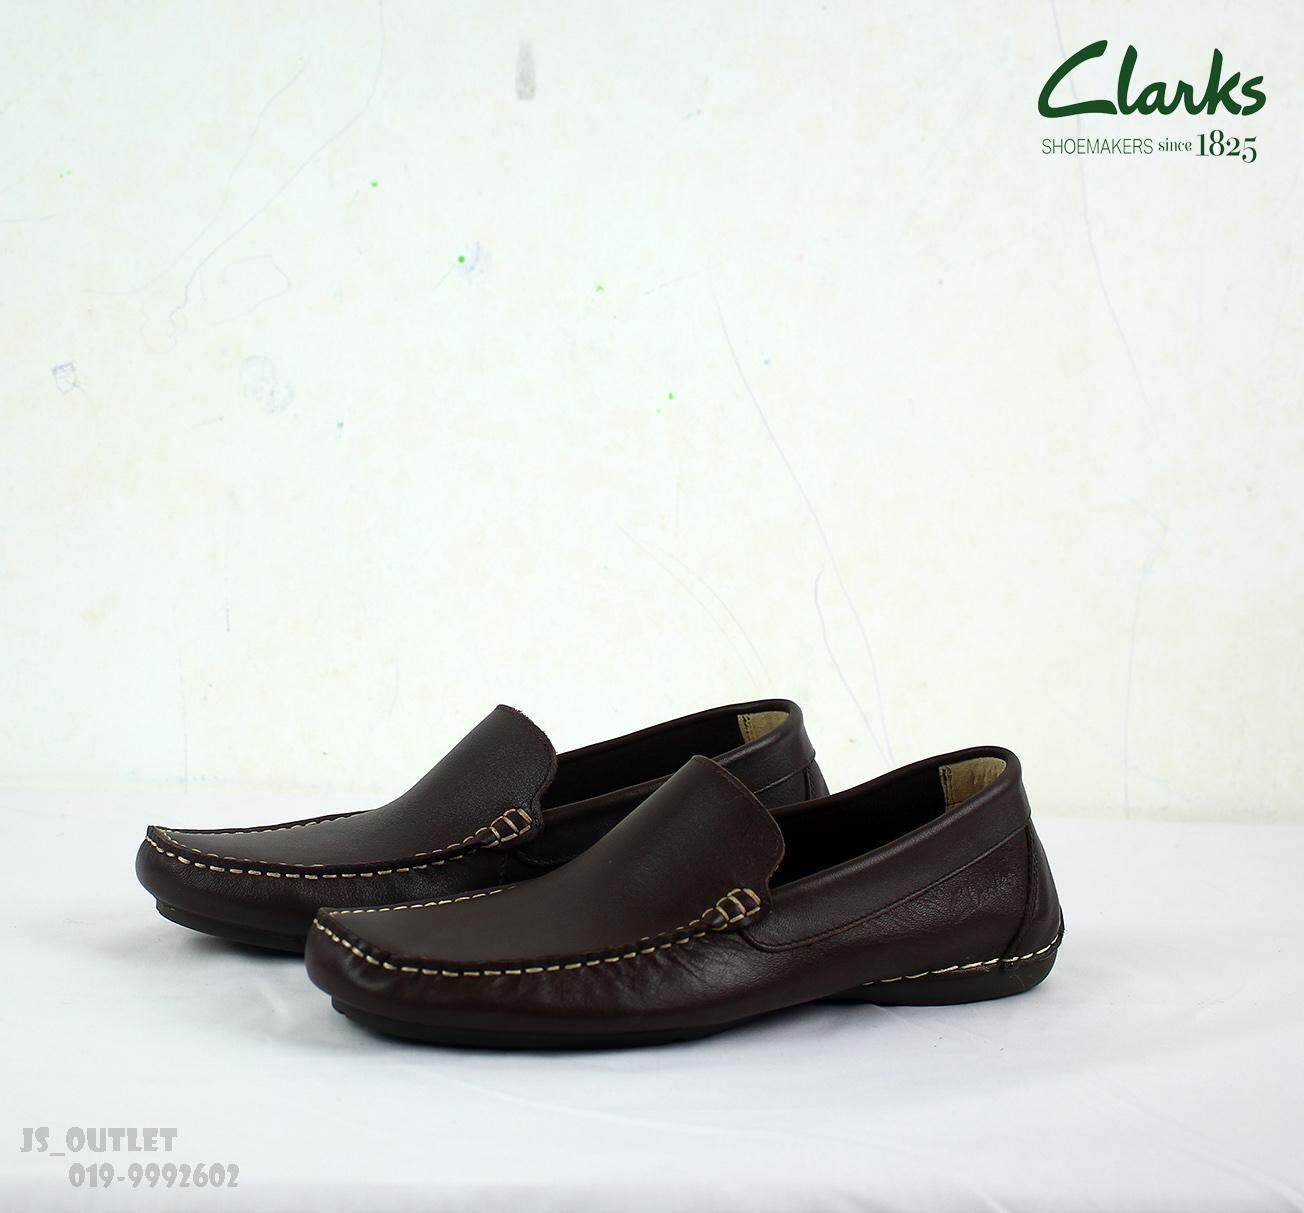 clarks shoes malaysia website